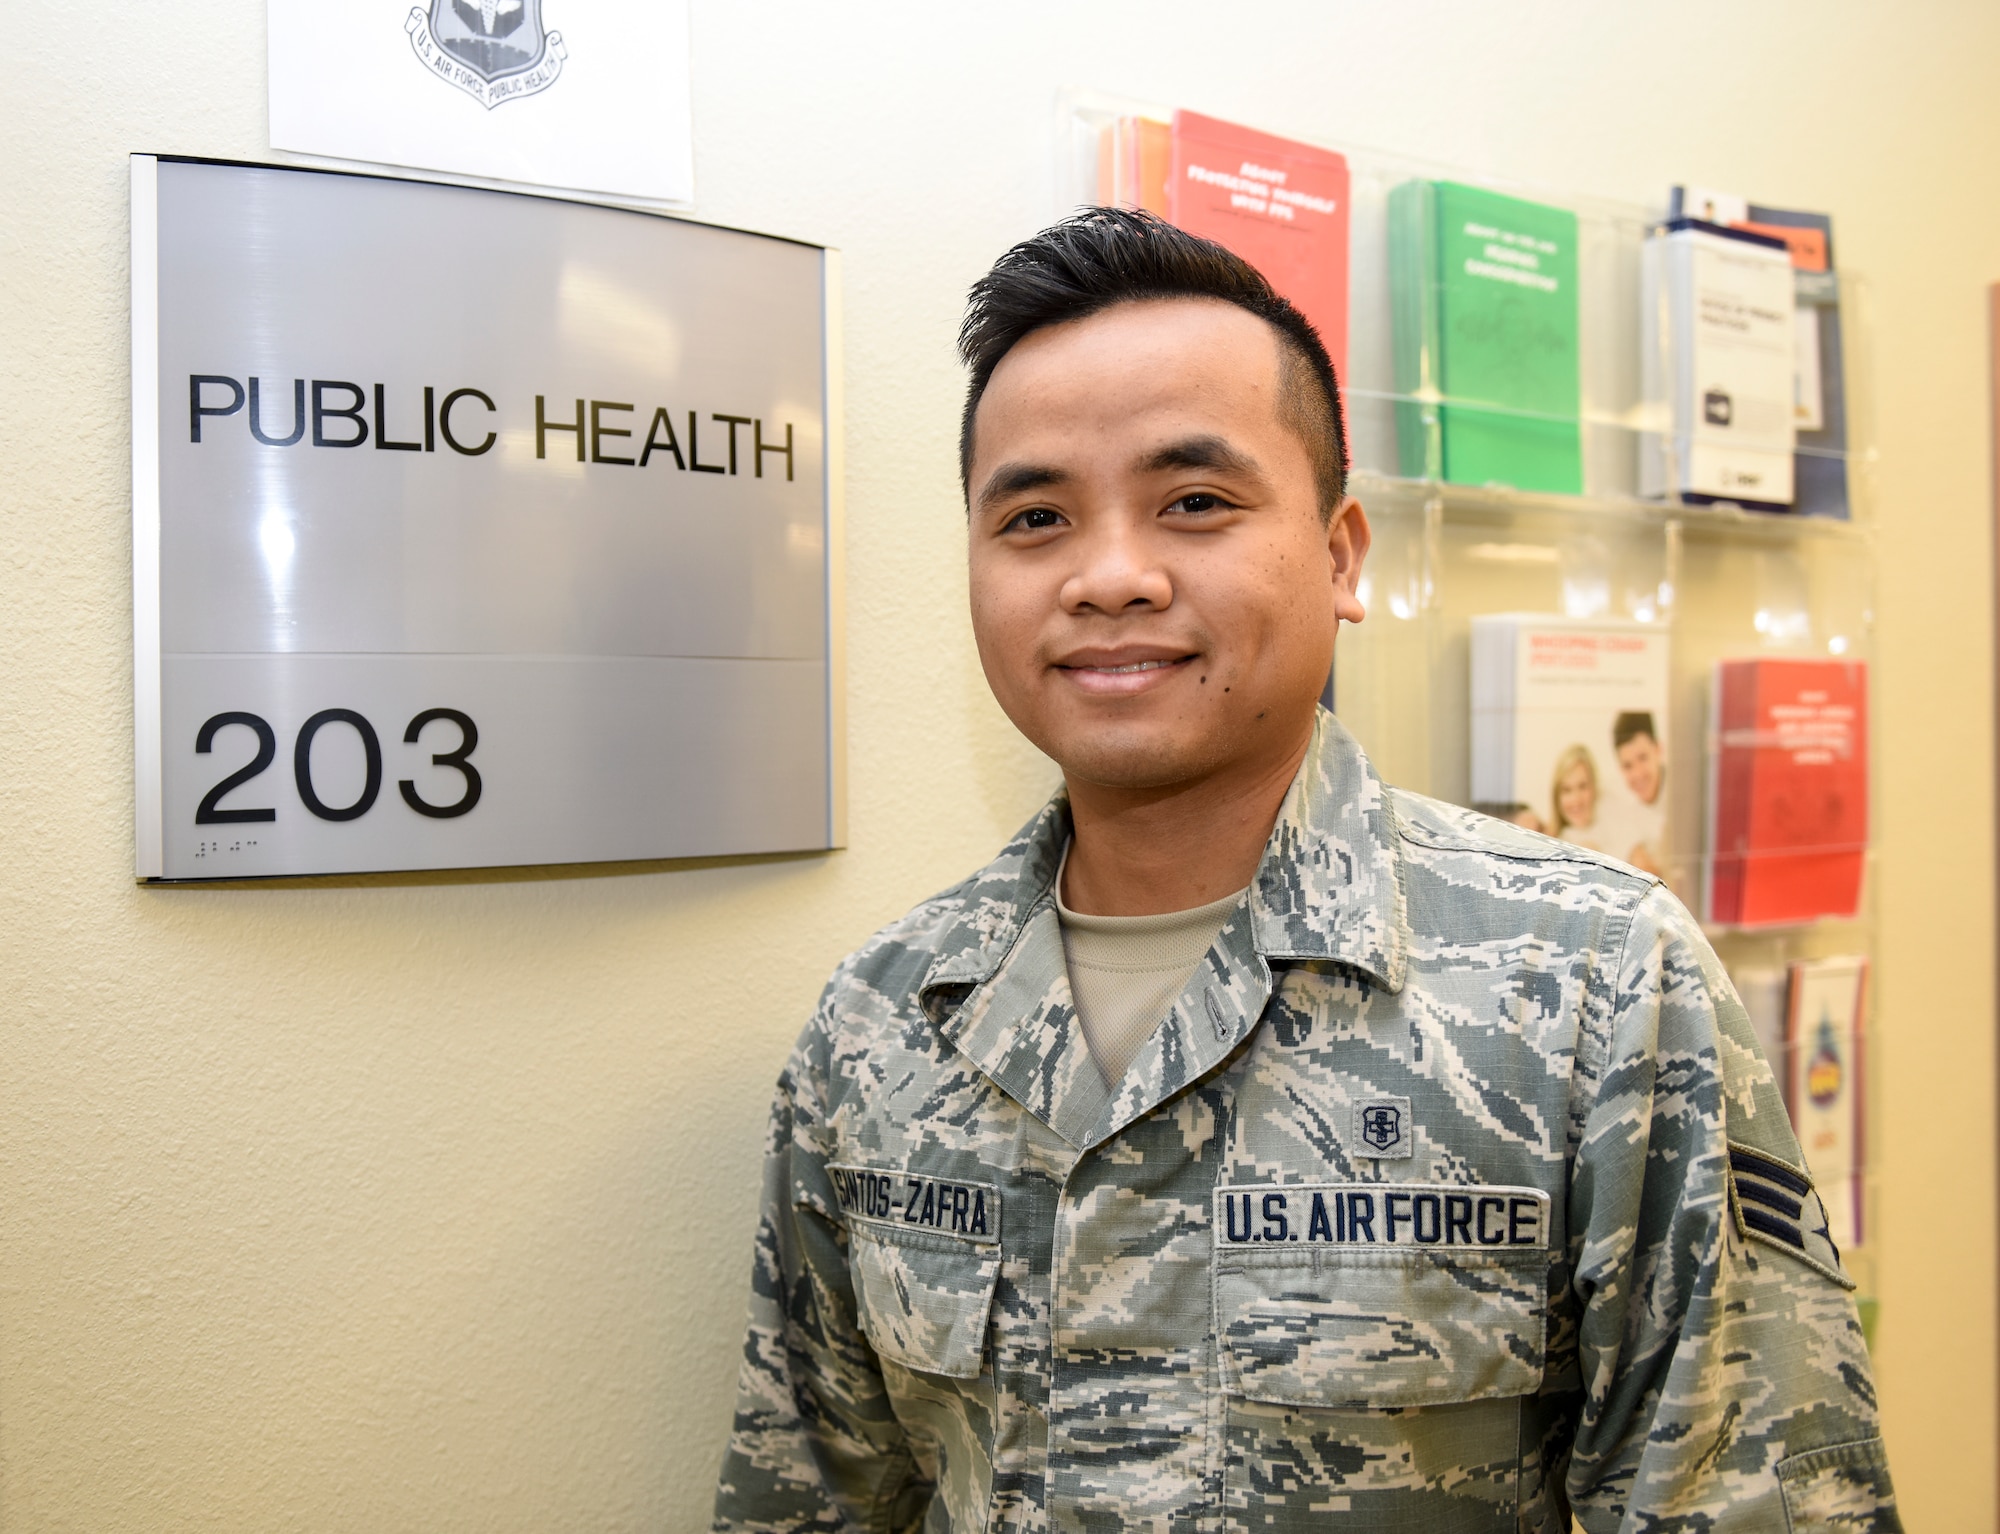 U.S. Air Force Senior Airman John Santos Zafra, 17th Medical Operations Squadron public health technician stands next to his office at the Ross Clinic on Goodfellow Air Force Base, Texas, Sept. 24, 2018. Zafra has been living in the states since he was 13- years-old and used the assistance of the Air Force to become a U.S. citizen.  (U.S. Air Force photo by Aryn Lockhart/Released)